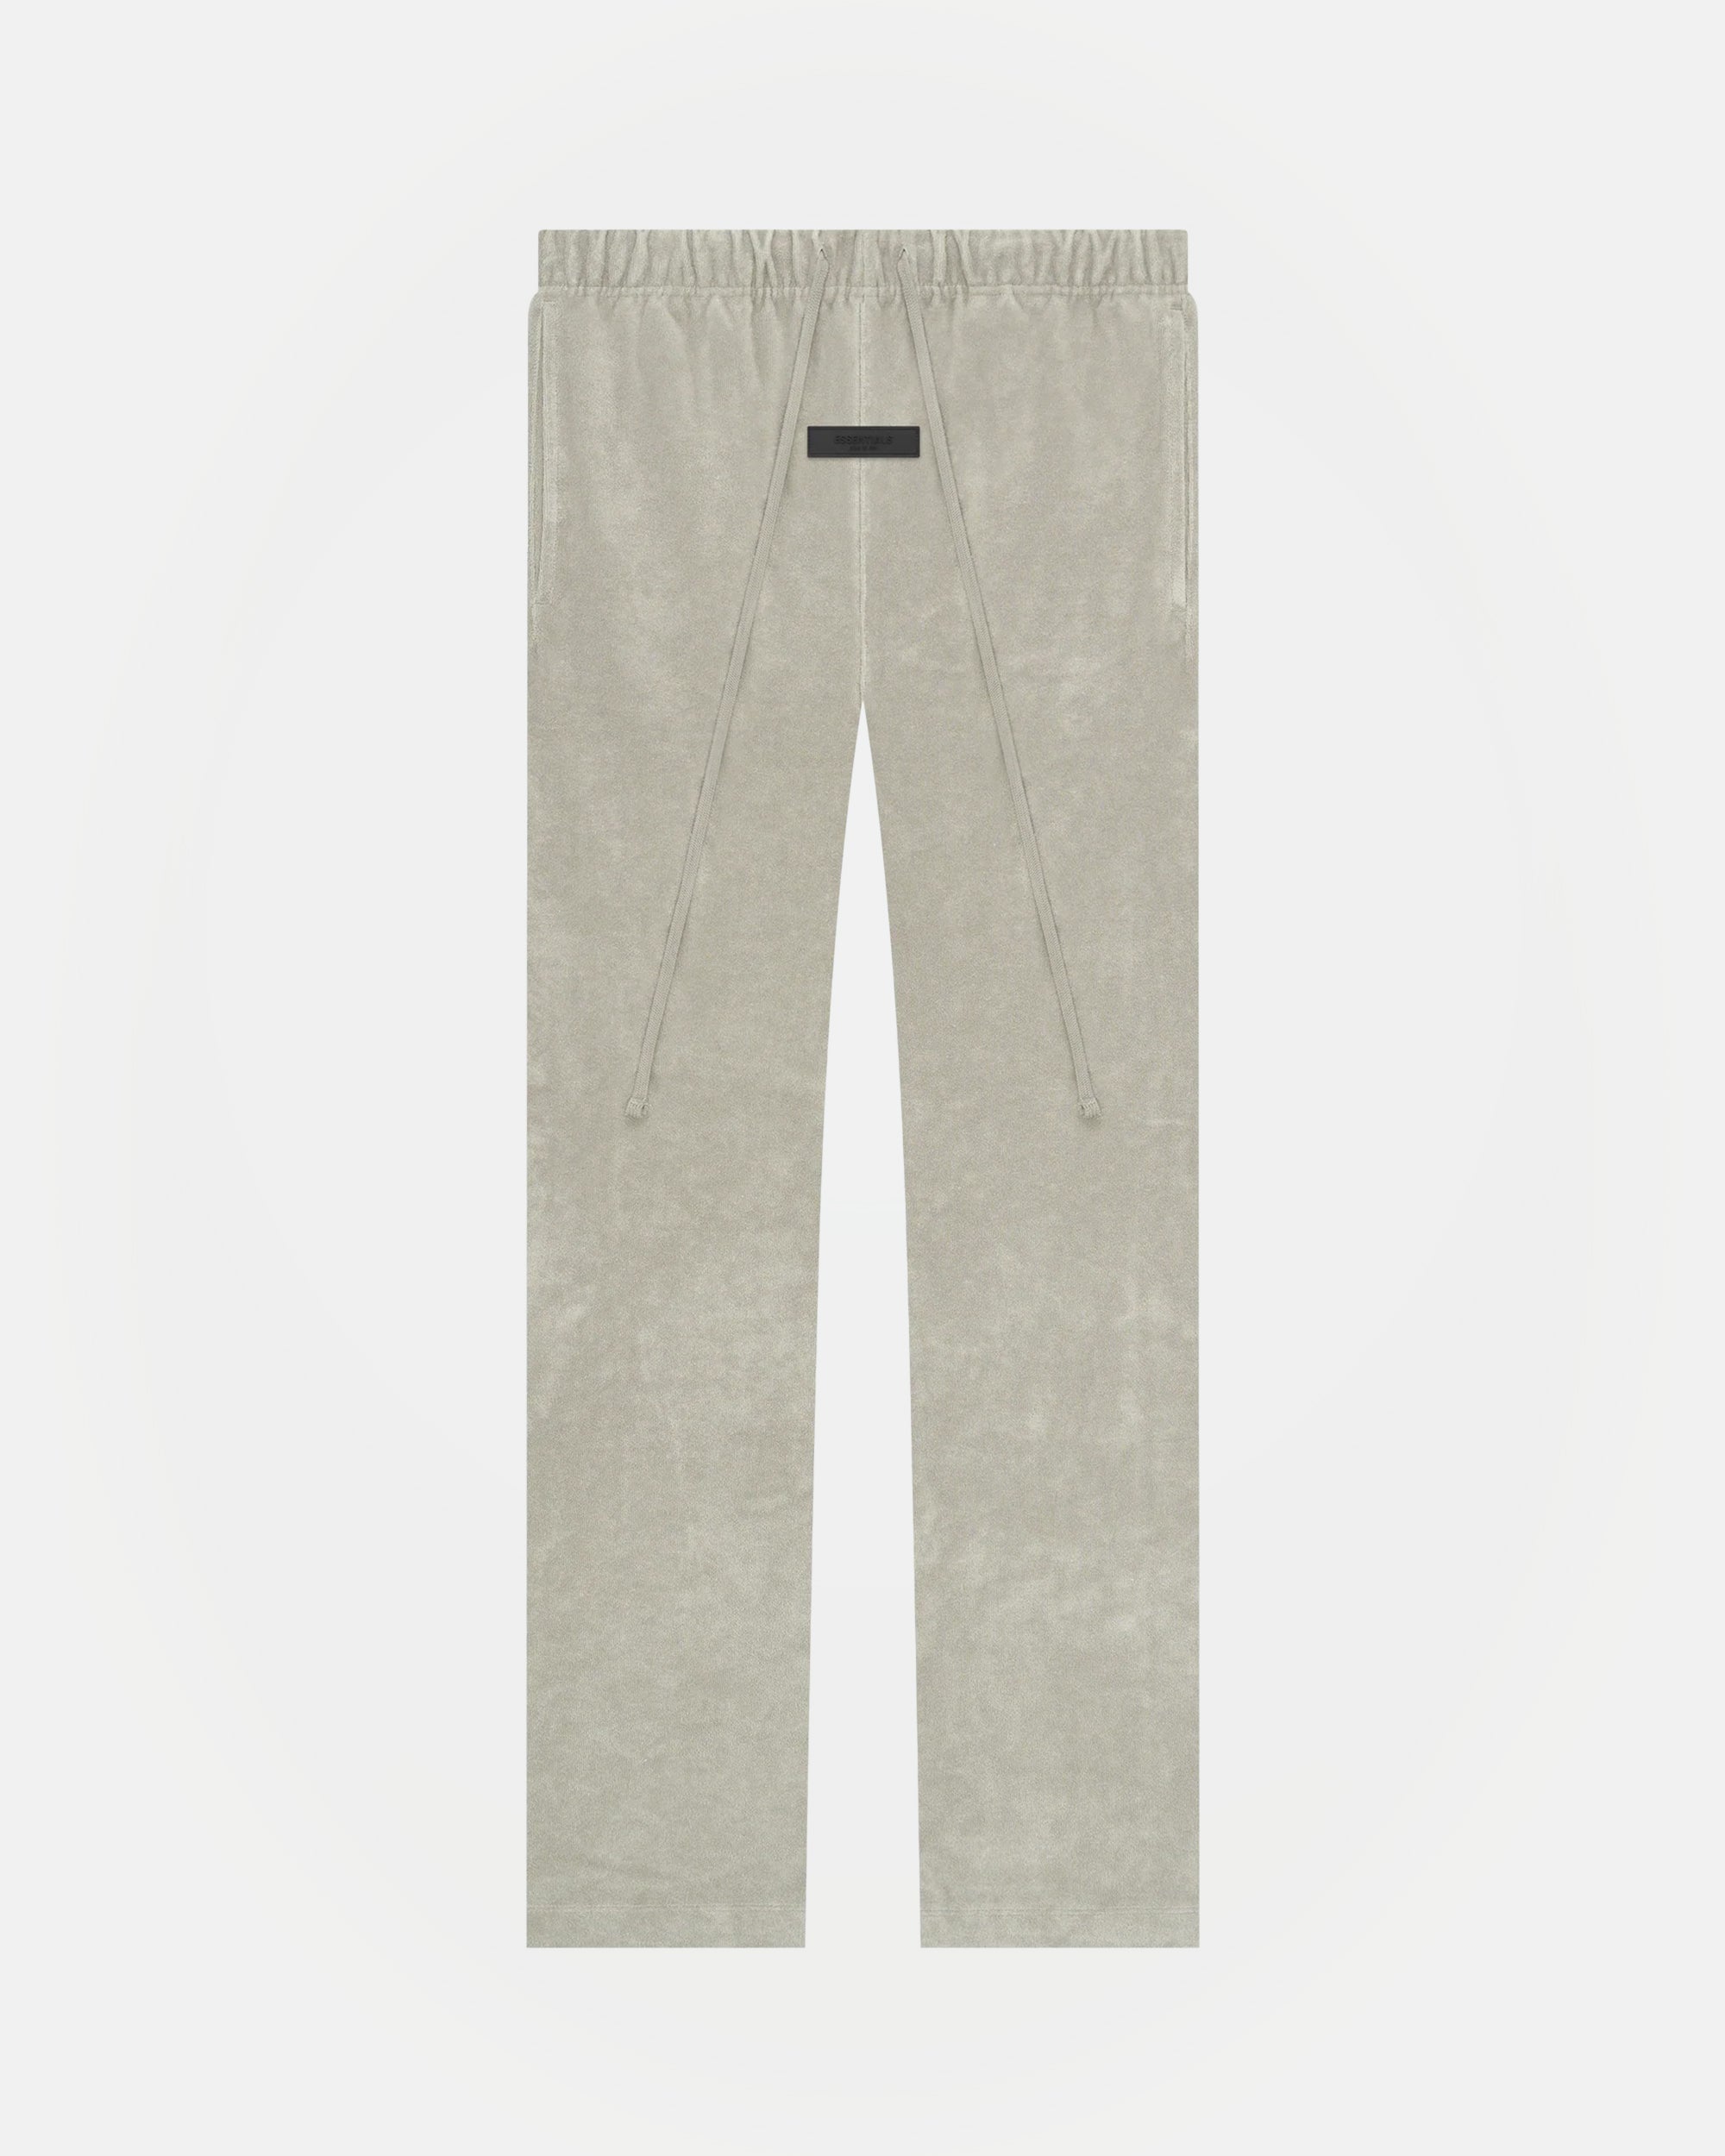 Gray Polyester Lounge Pants by Fear of God ESSENTIALS on Sale